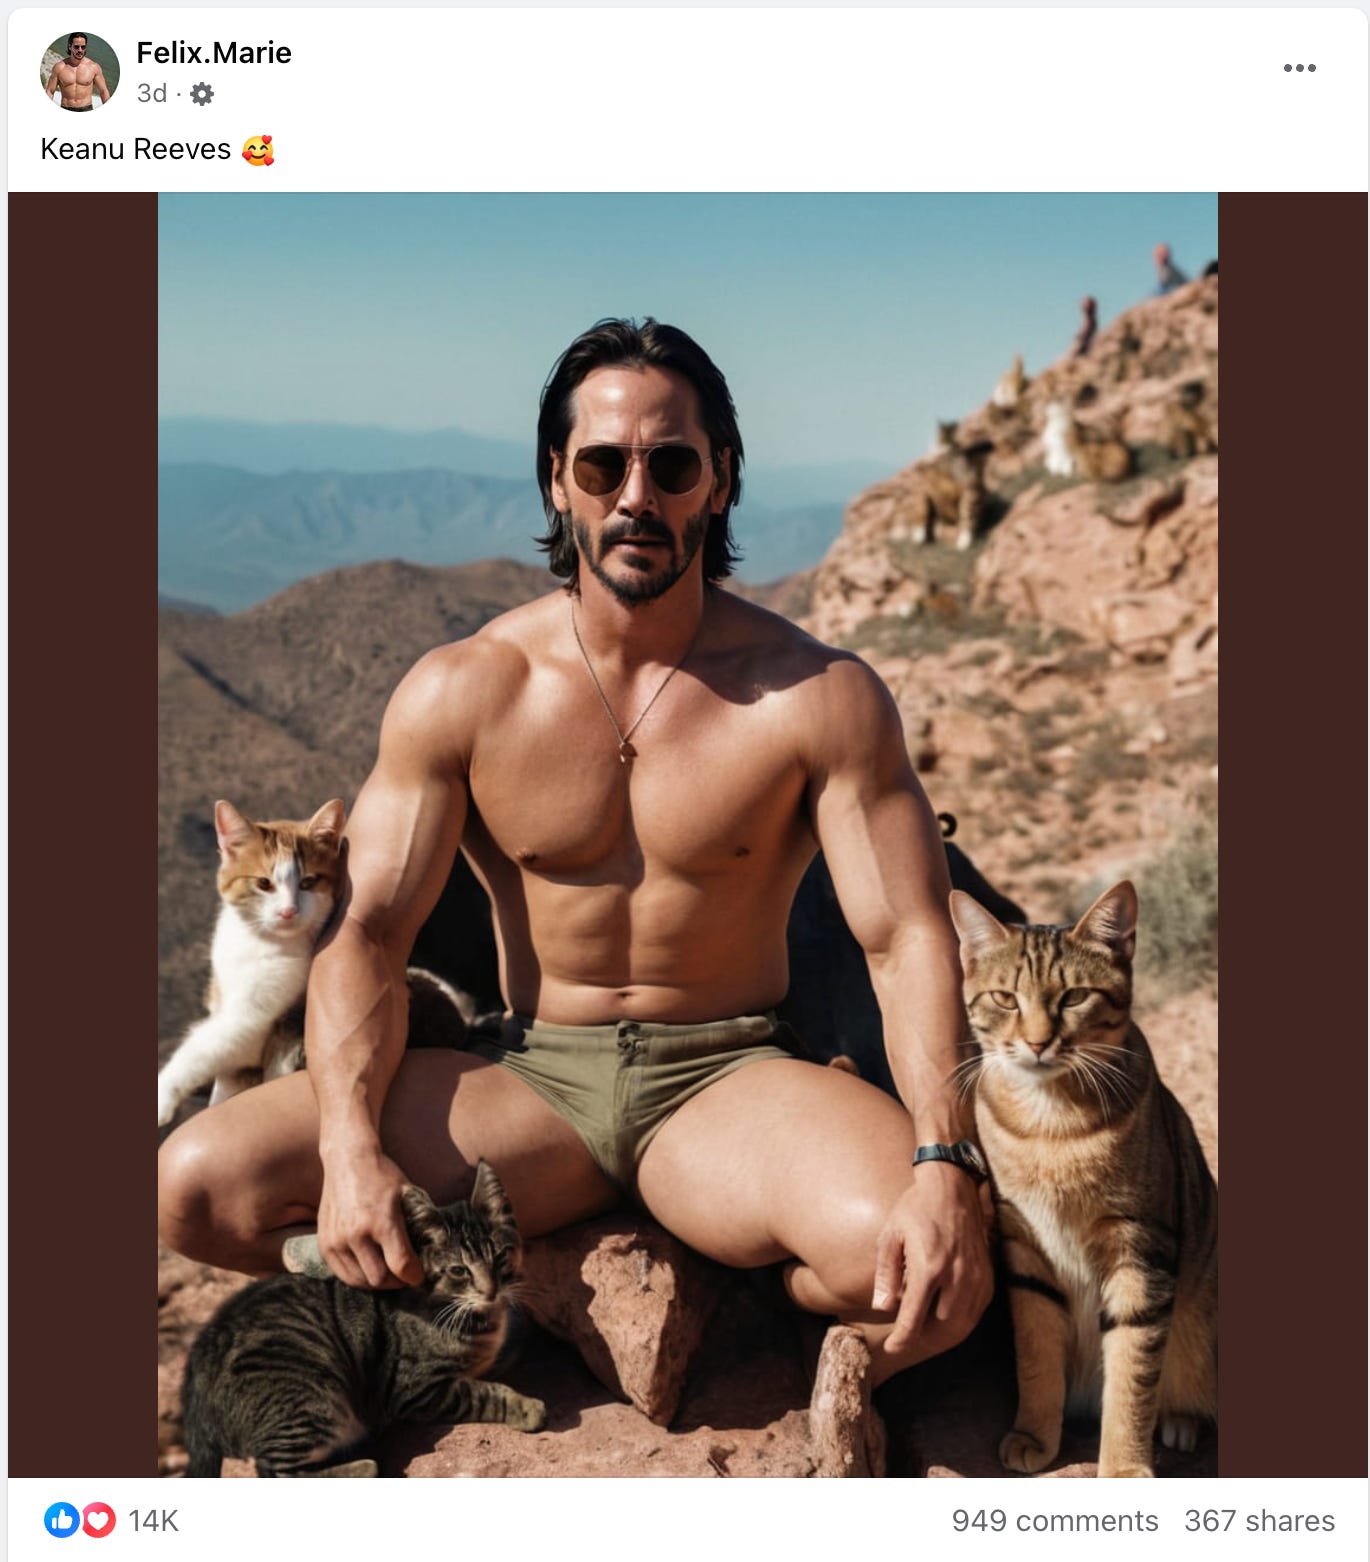 screenshot of a Facebook post with an AI-generated image of shirtless Keanu Reeves surrounded by cats